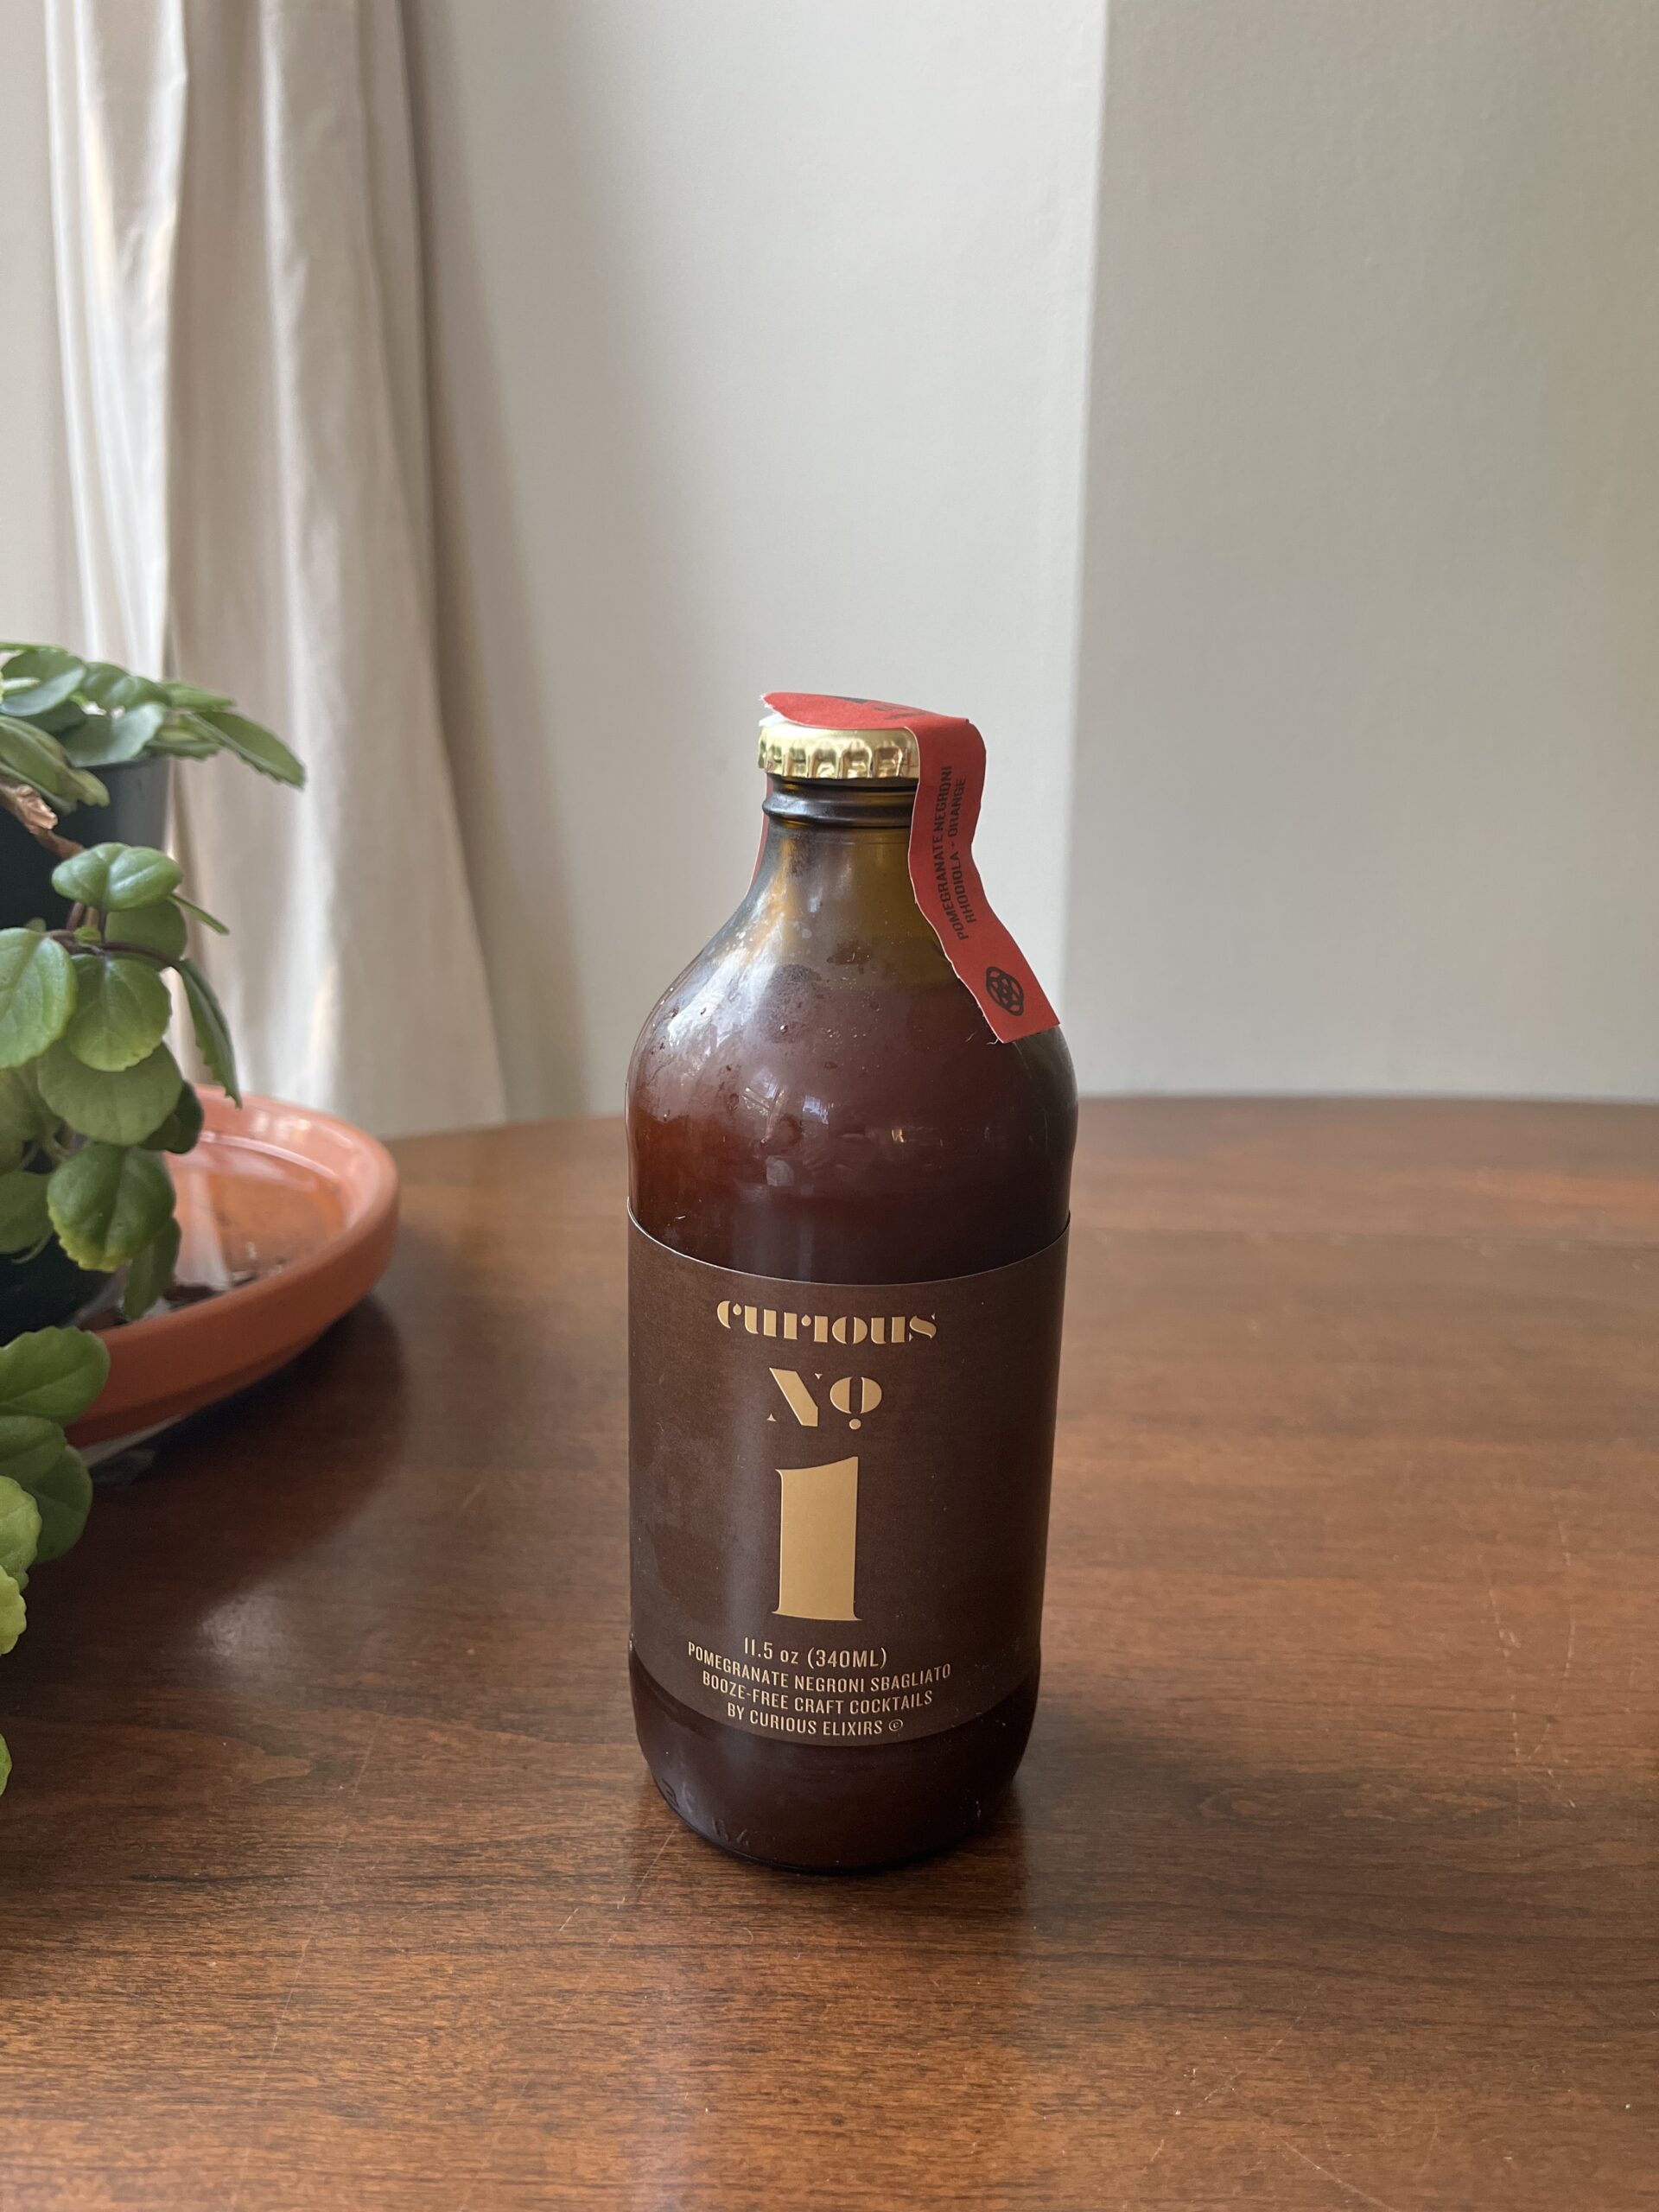 A brown bottle with a gold cap labeled "Curious No. 1" is placed on a wooden surface. A potted plant and a curtain are in the background.